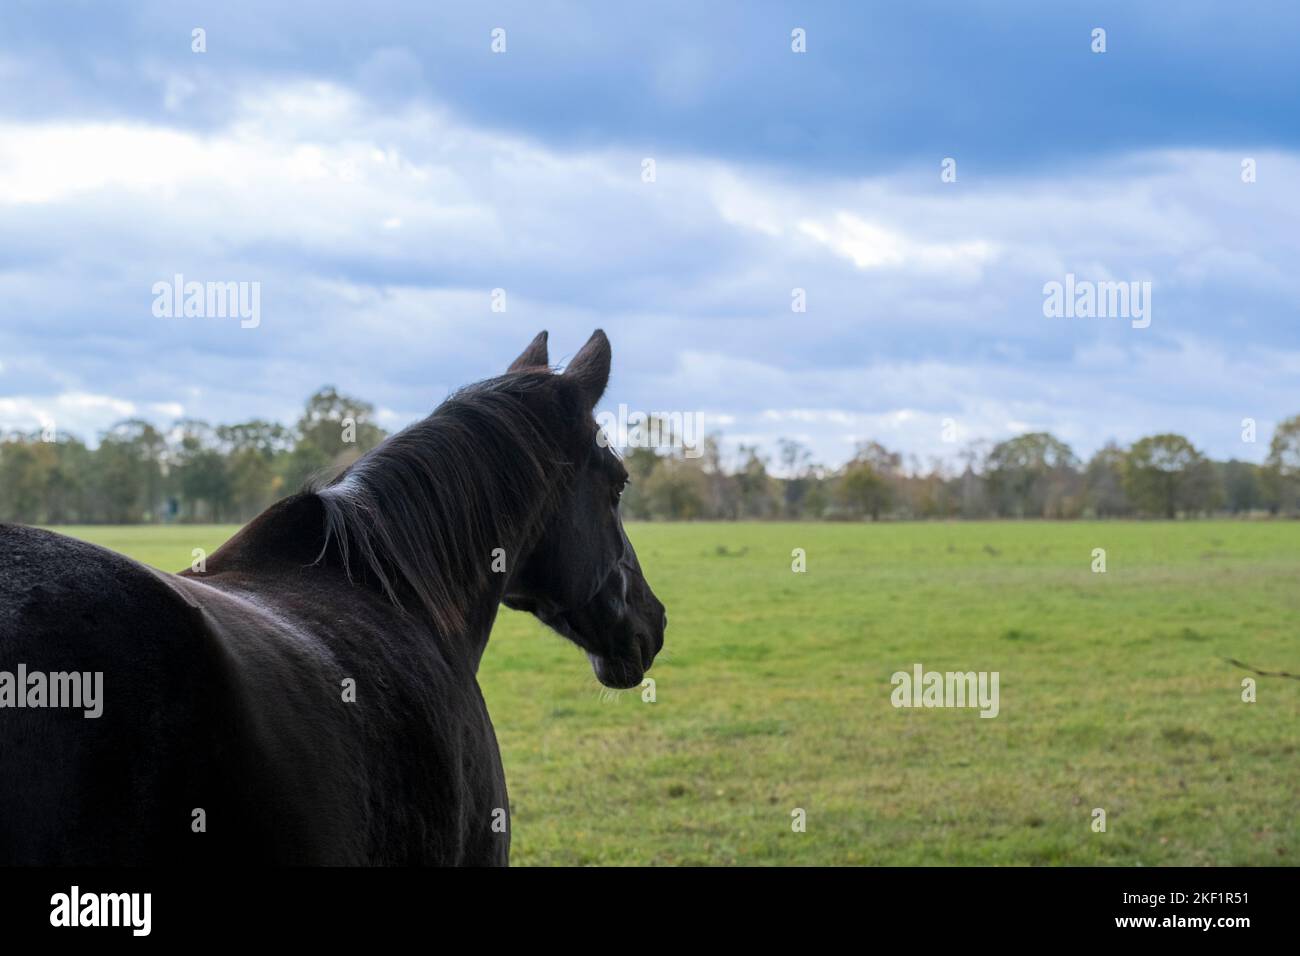 a beautiful horse wandering alone in the meadow. Black horse. Stock Photo